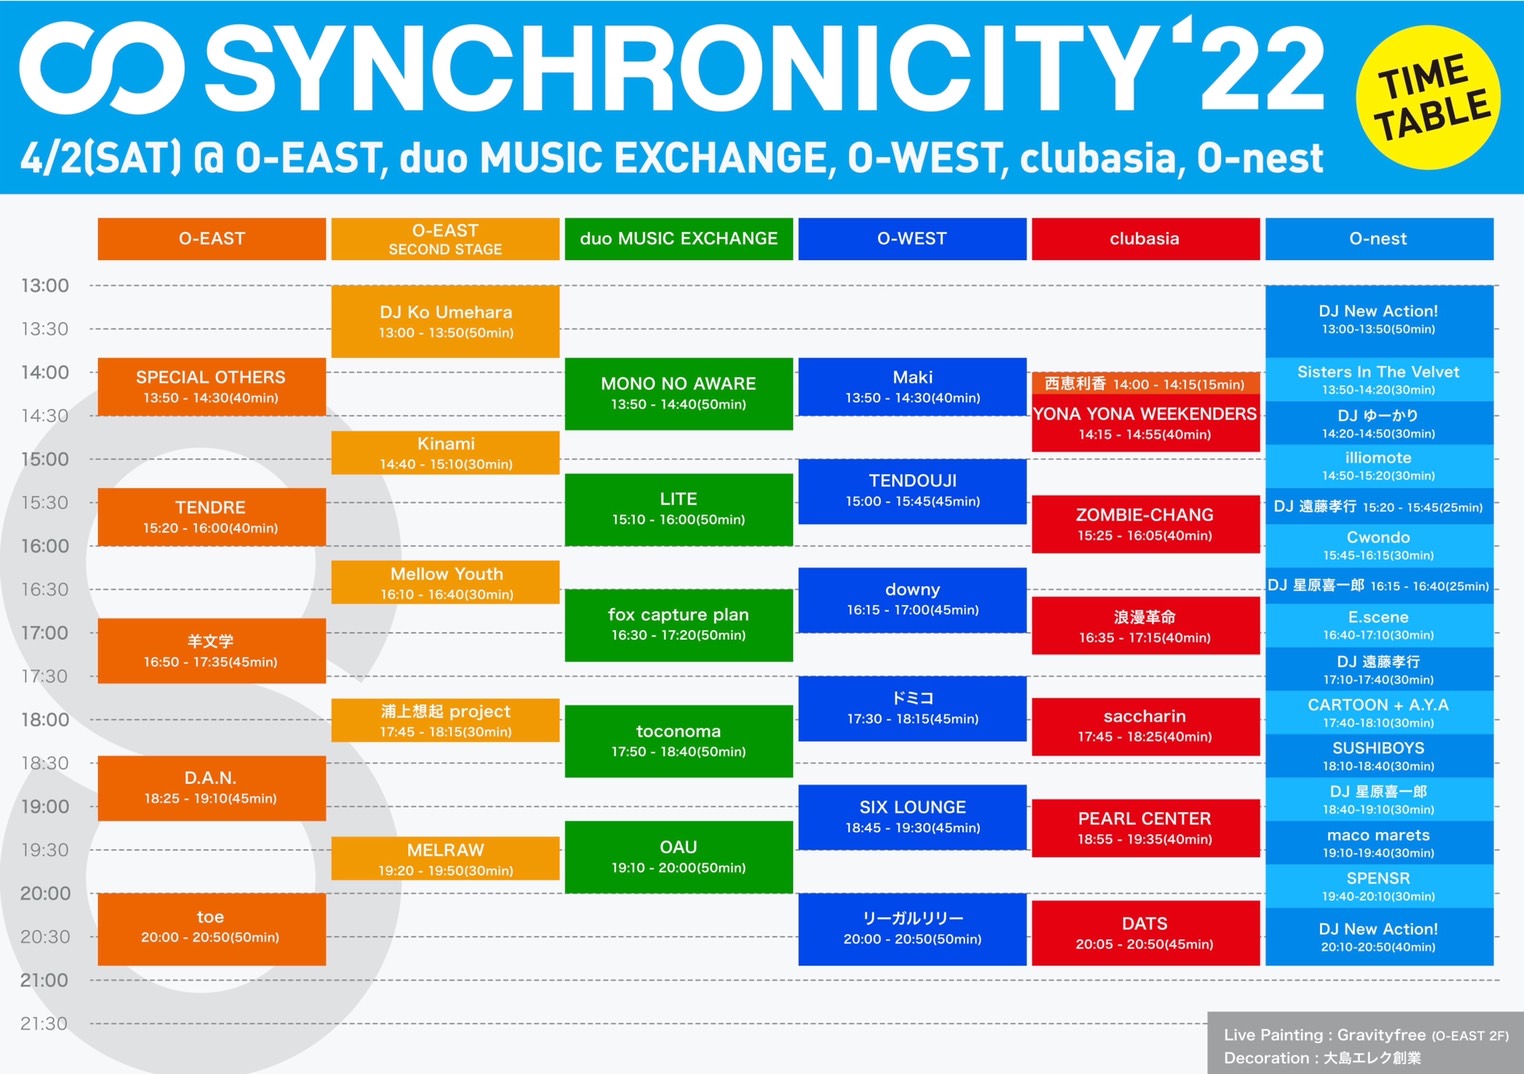 SYNCHRONICITY'22 TIMETABLE 4/2(SAT)